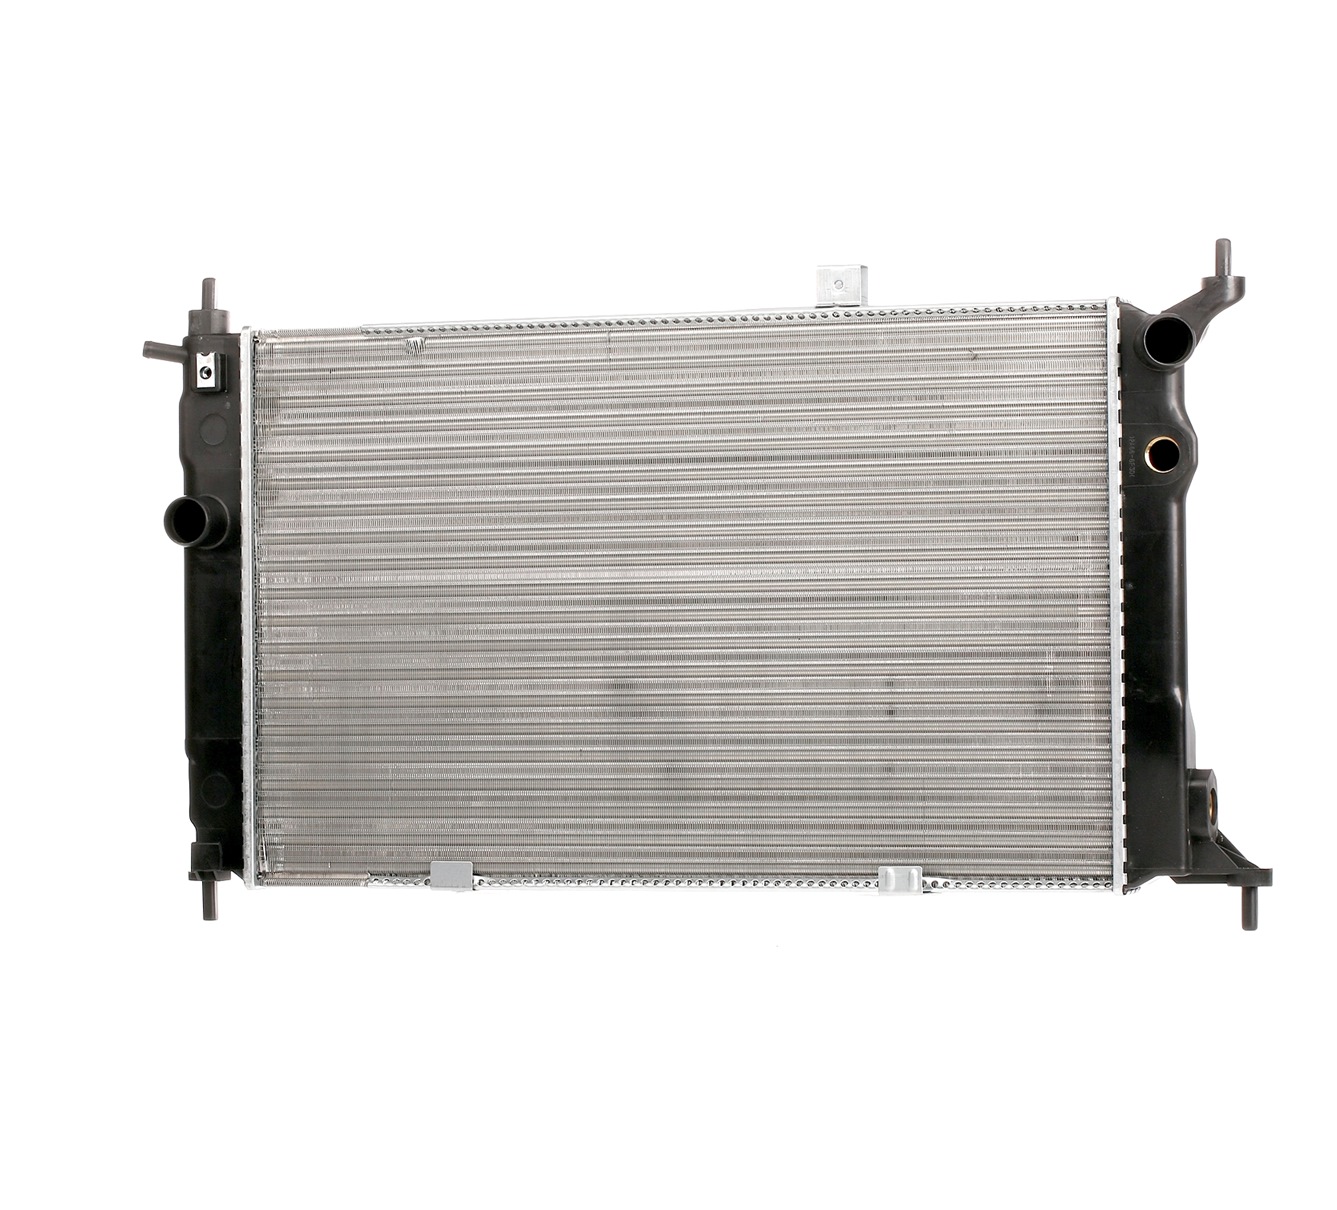 STARK SKRD-0120339 Engine radiator Aluminium, for vehicles with air conditioning, 590 x 378 x 34 mm, Manual Transmission